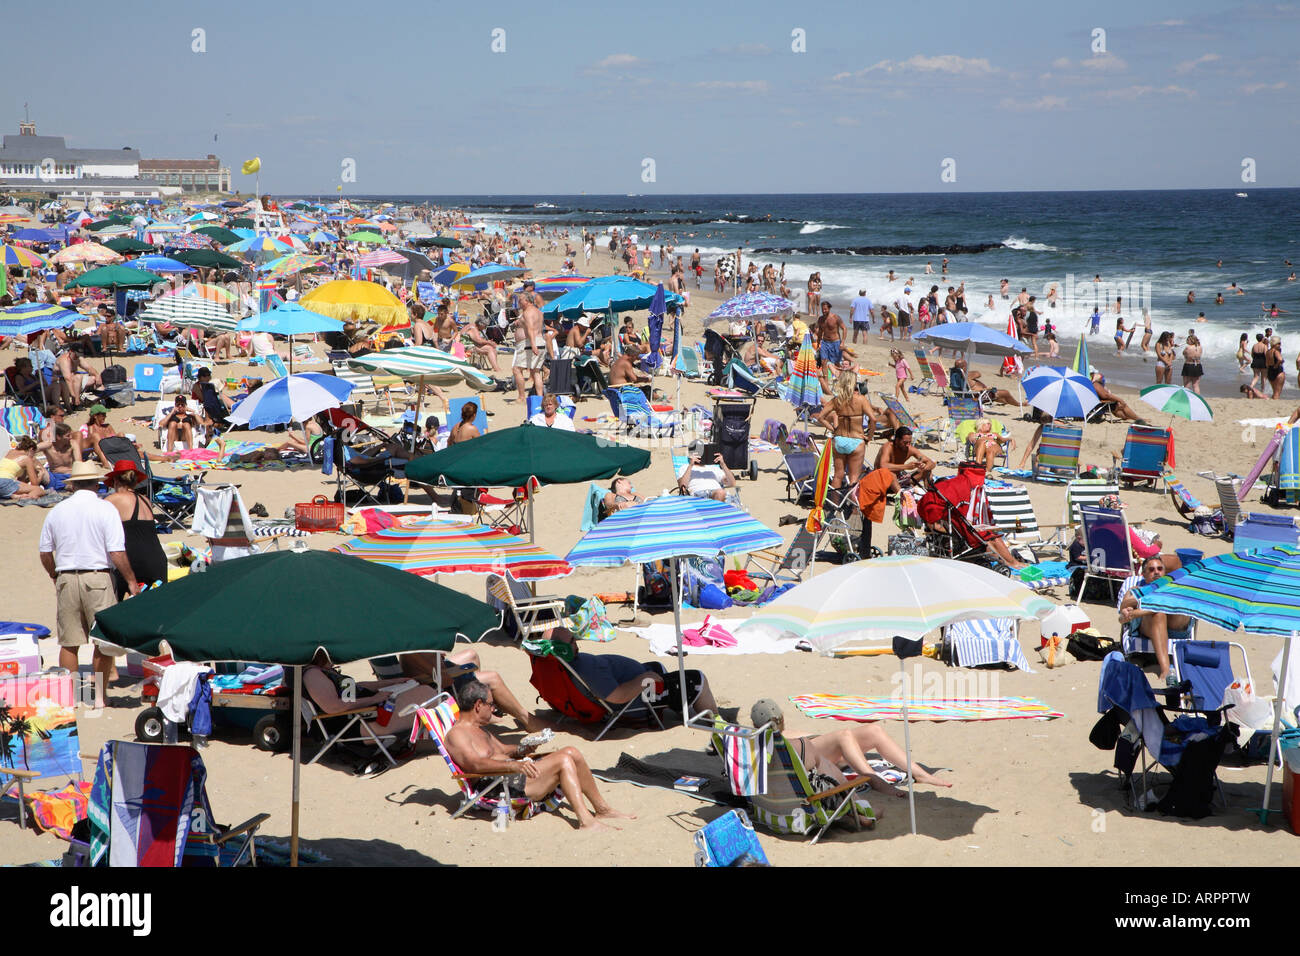 Mass of people with colorful beach umbrellas, chairs, towels and other paraphernalia clustered together all along sandy shore Stock Photo